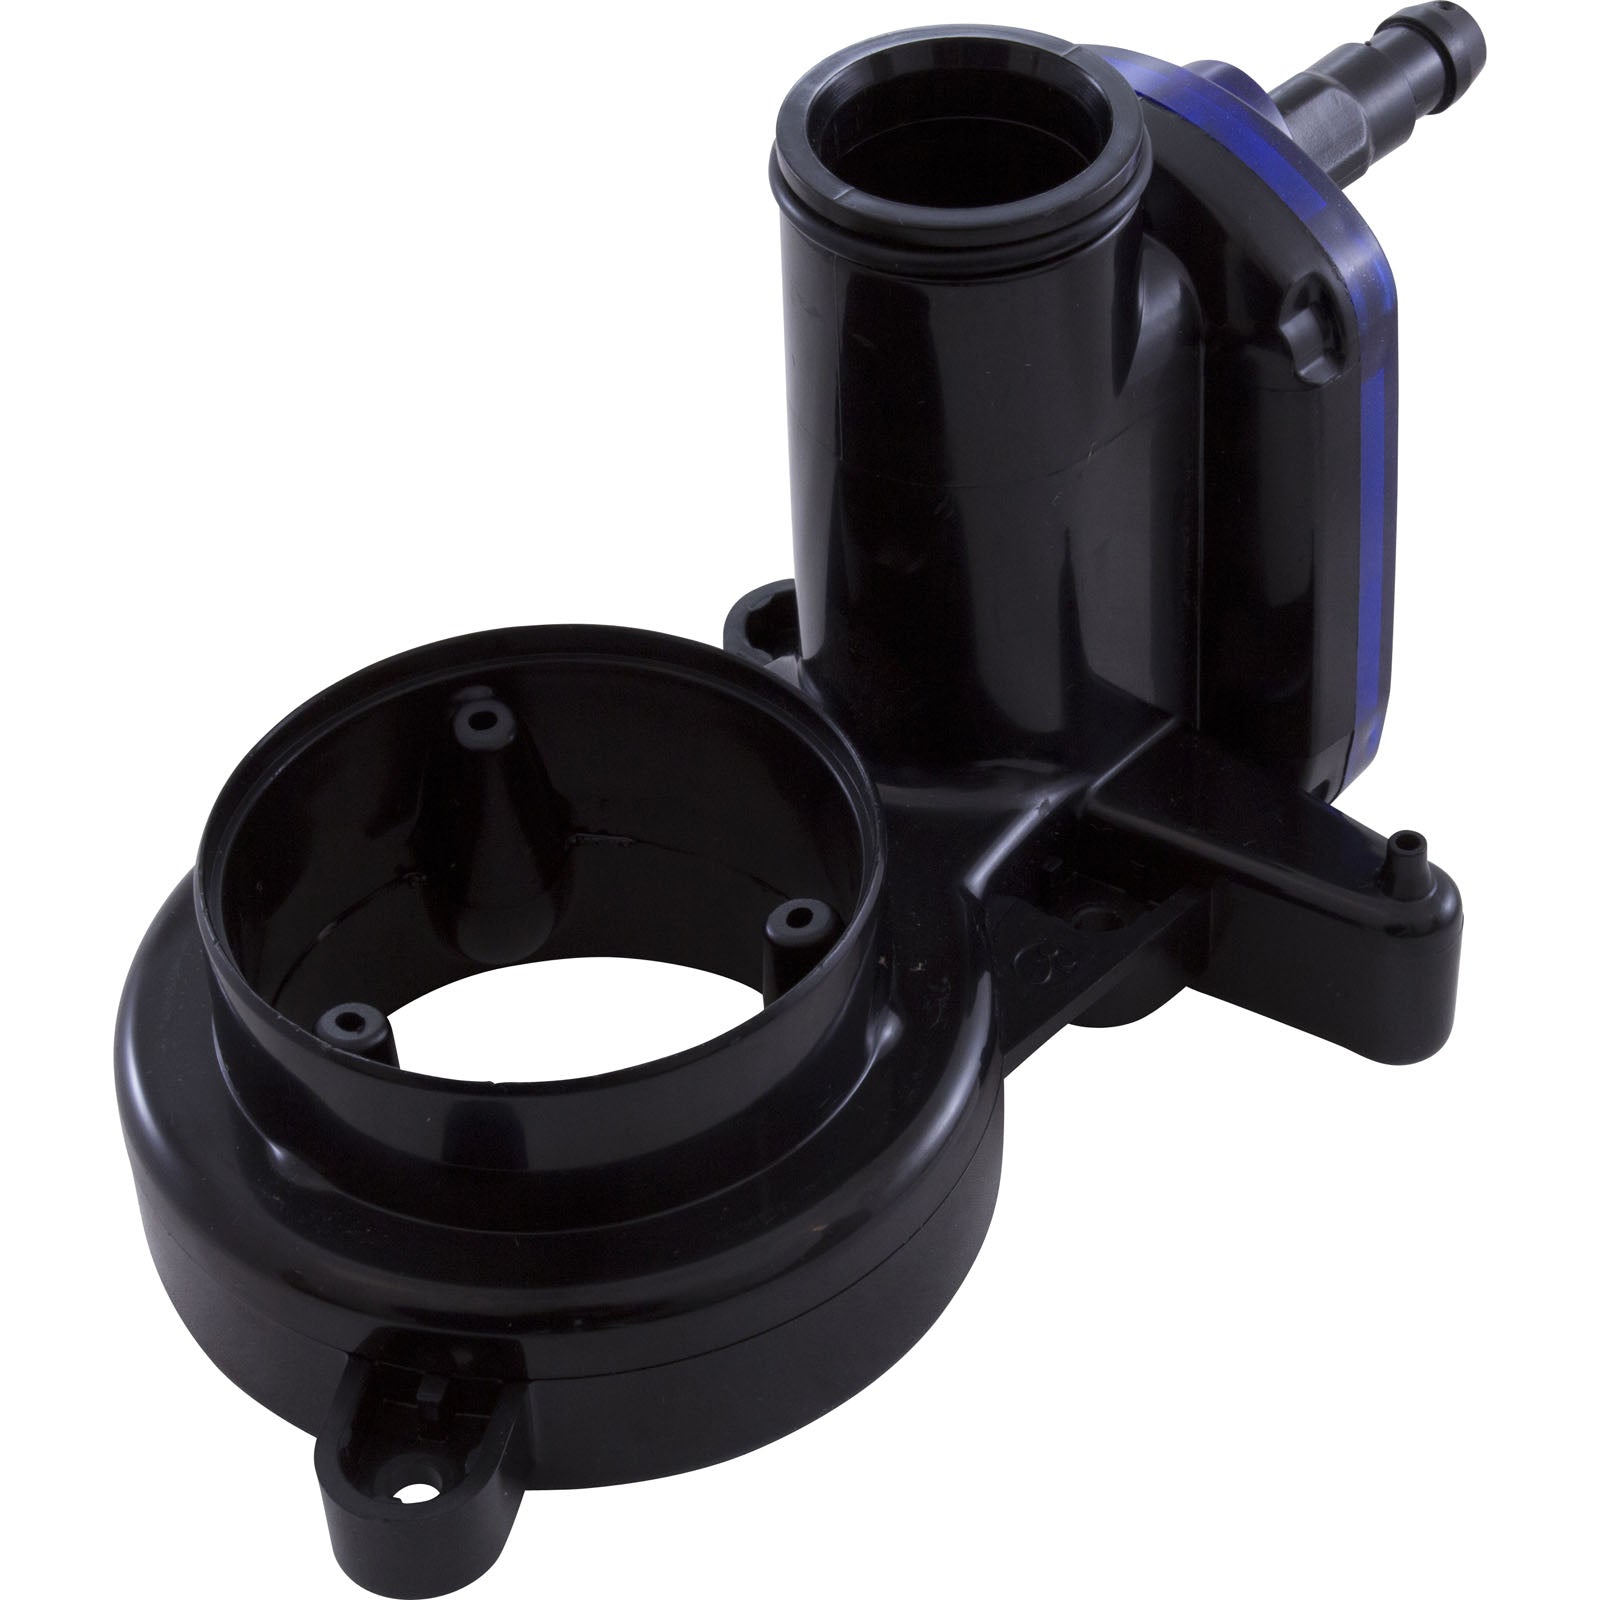 Zodiac/Polaris 39-300 Water Management Assembly with O-Ring for 3900 Sport Pool Cleaner